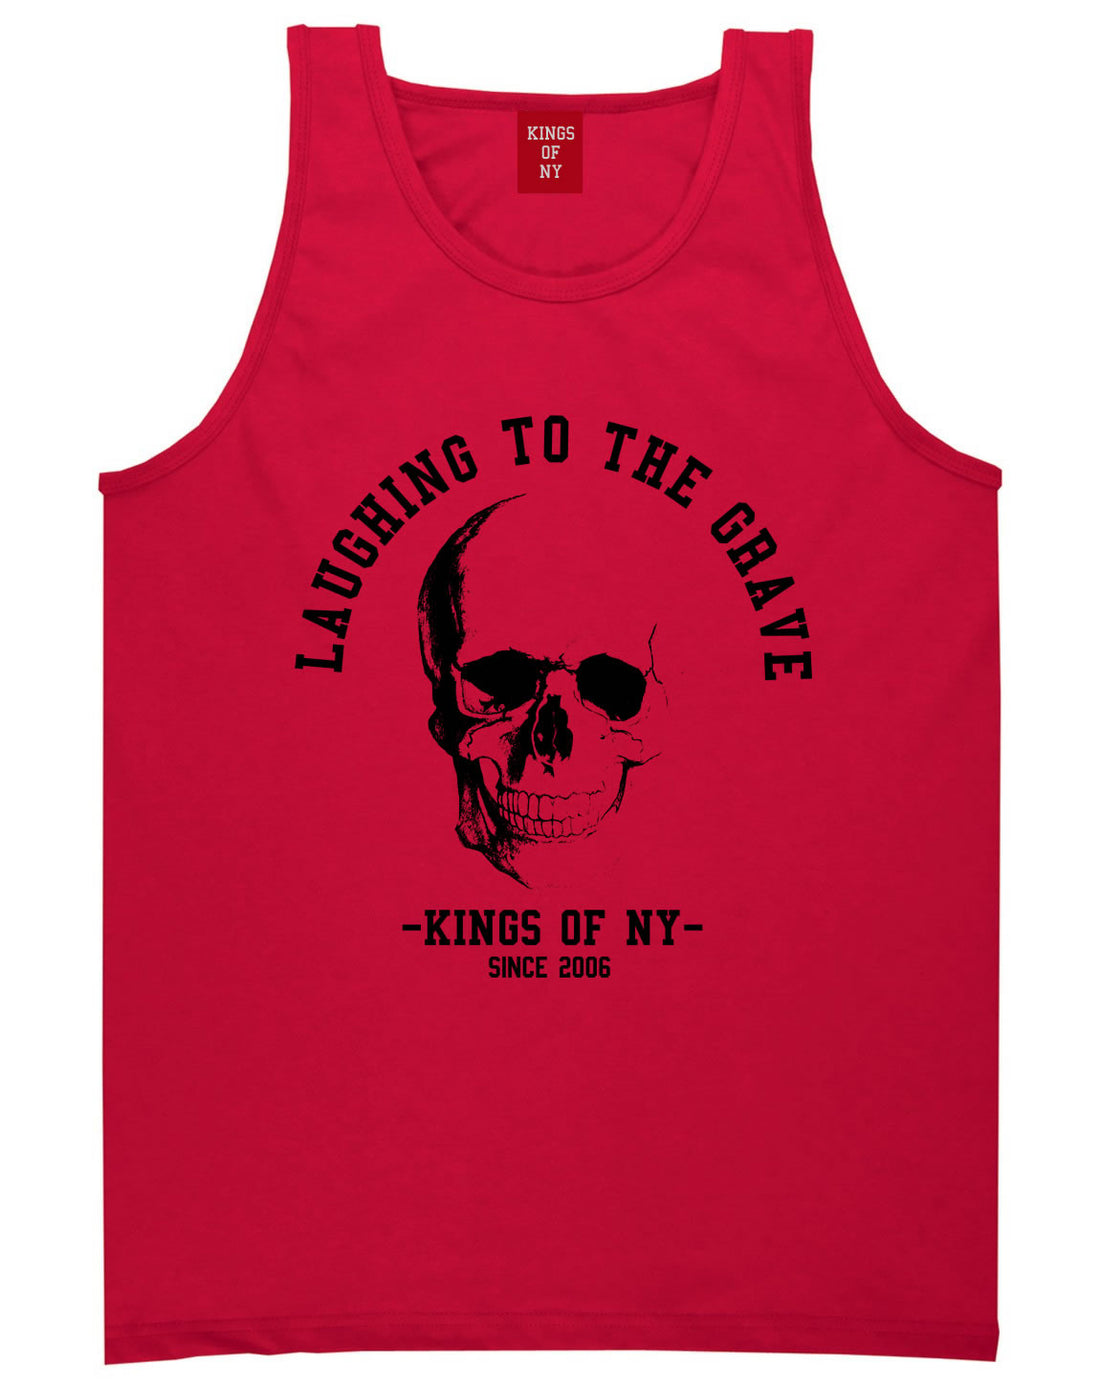 Laughing To The Grave Skull 2006 Tank Top in Red By Kings Of NY